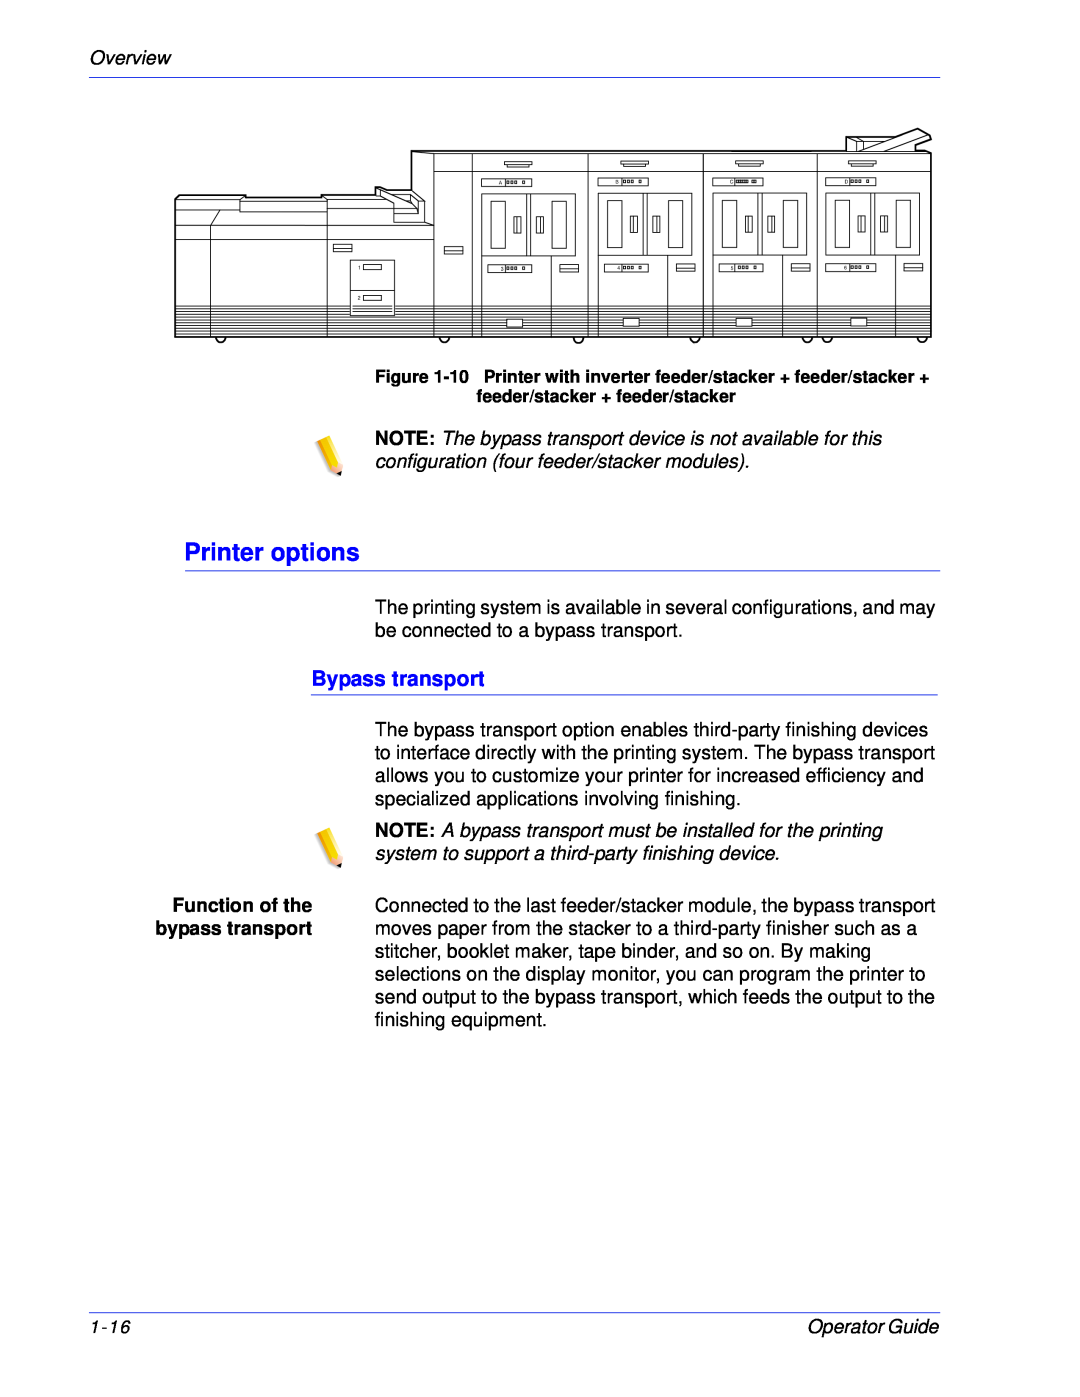 Xerox 100, 180 EPS manual Printer options, Bypass transport, Overview 